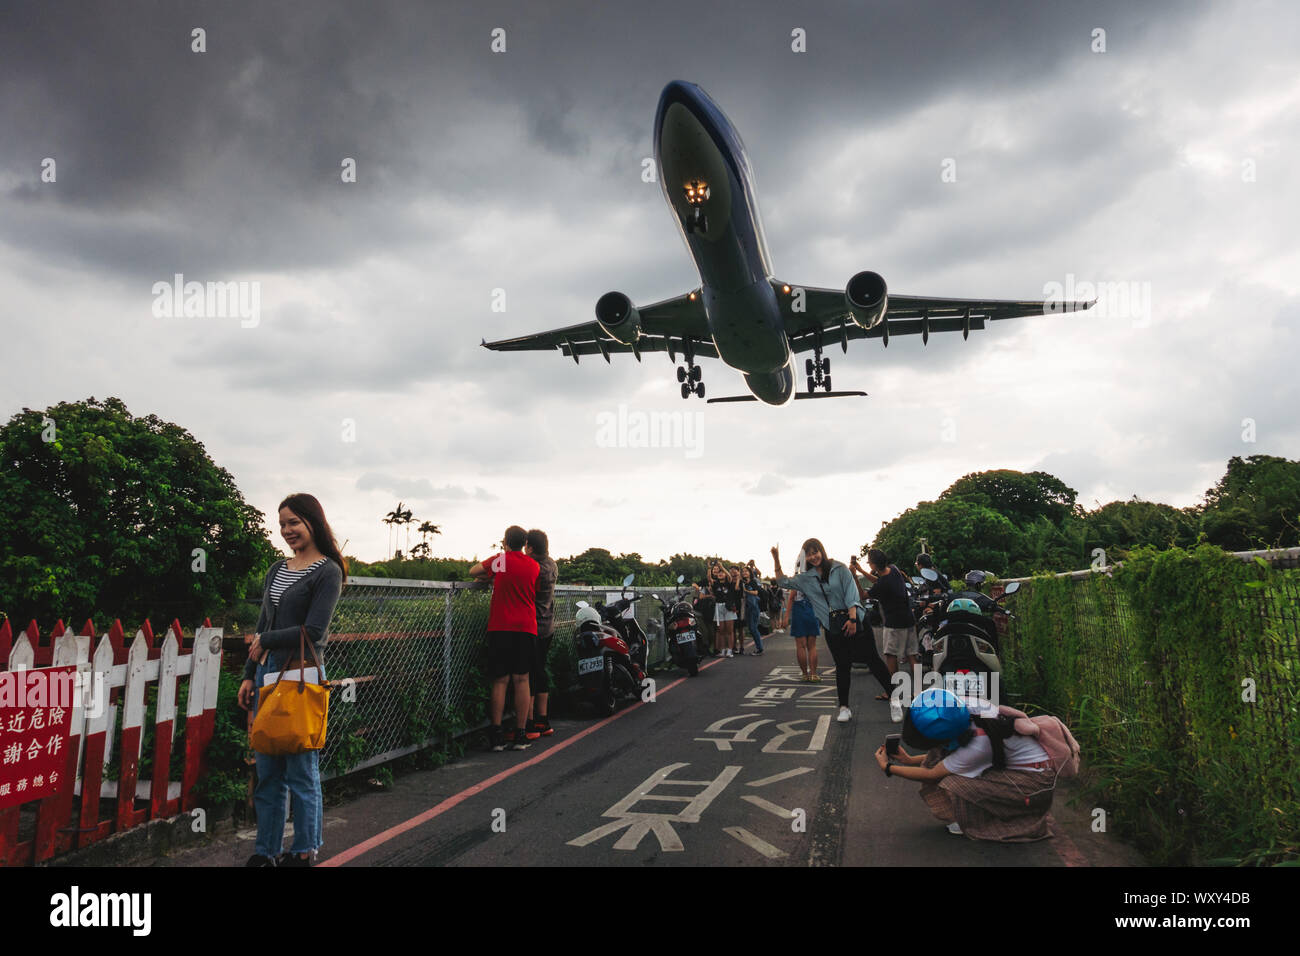 Sunset at 'Airplane Alley' - people pose for photos as an Airbus A330-300 flies low over their heads on approach to Songshan Airport, Taipei Stock Photo